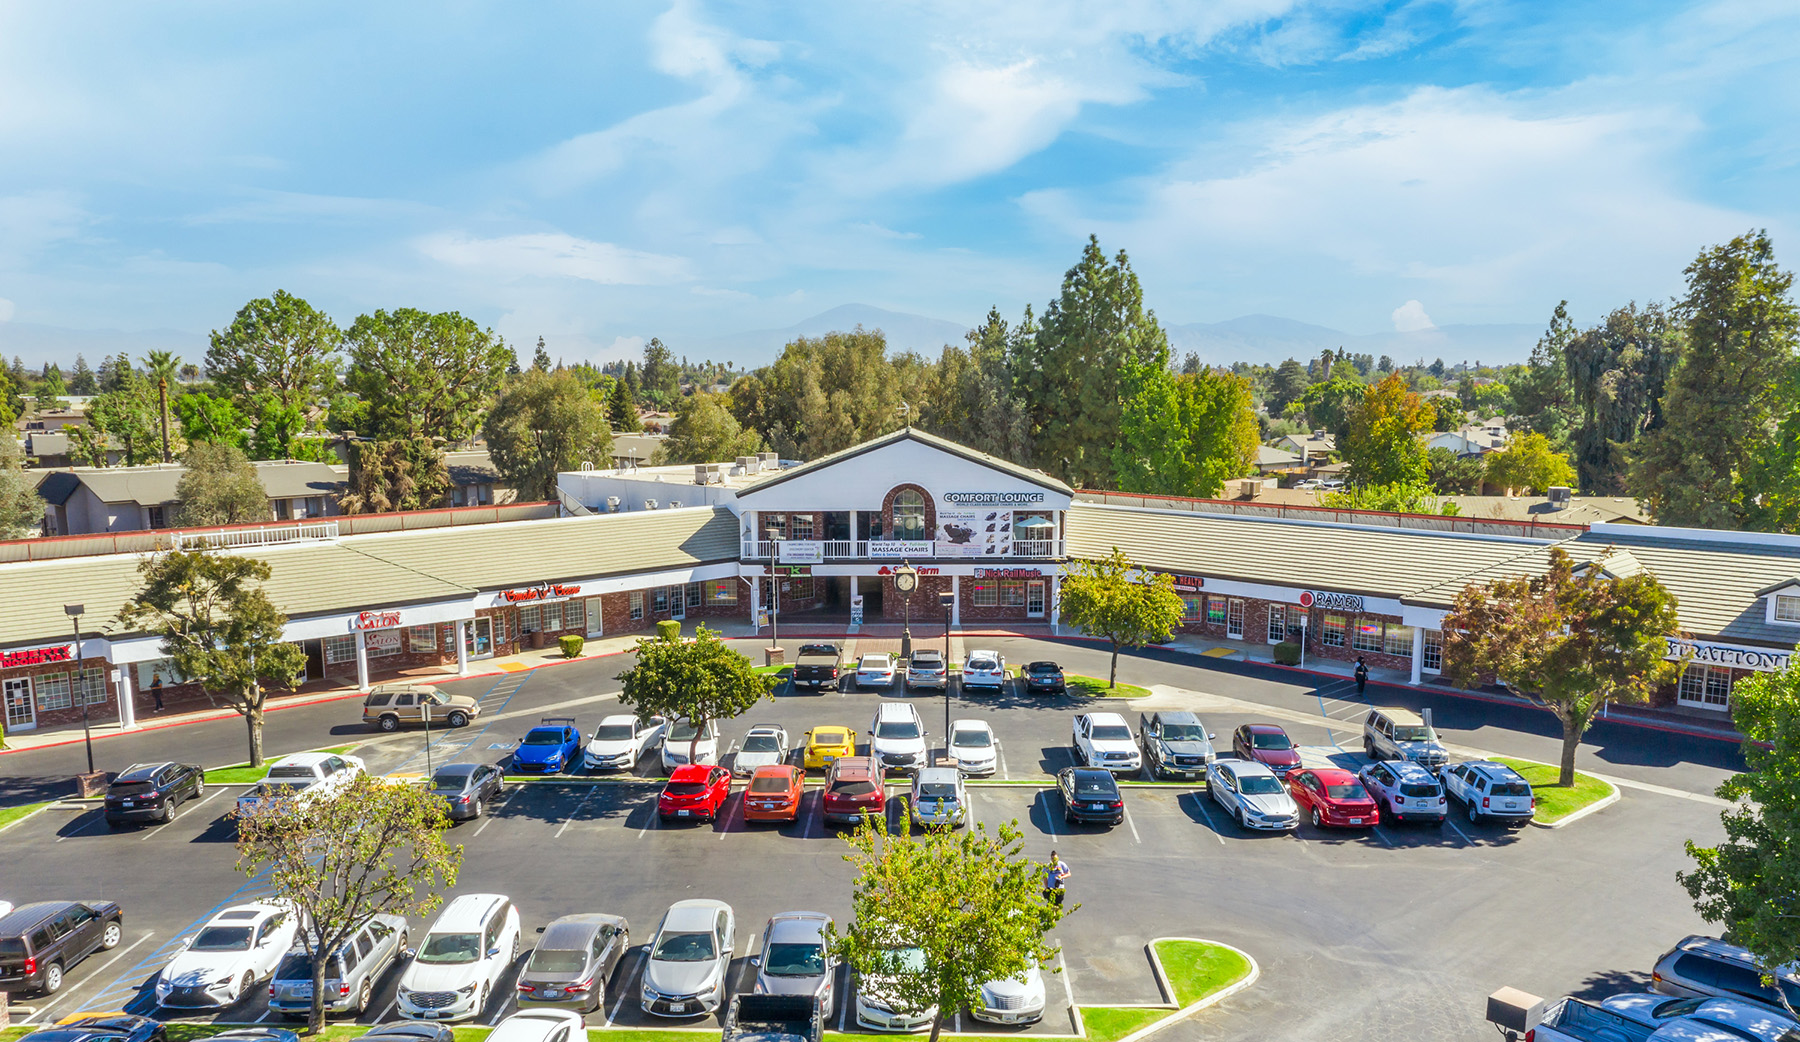 Hanley Investment Group Arranges Sale of 41,238 SF Shopping Center in Bakersfield, Calif. for $10.1 Million 20